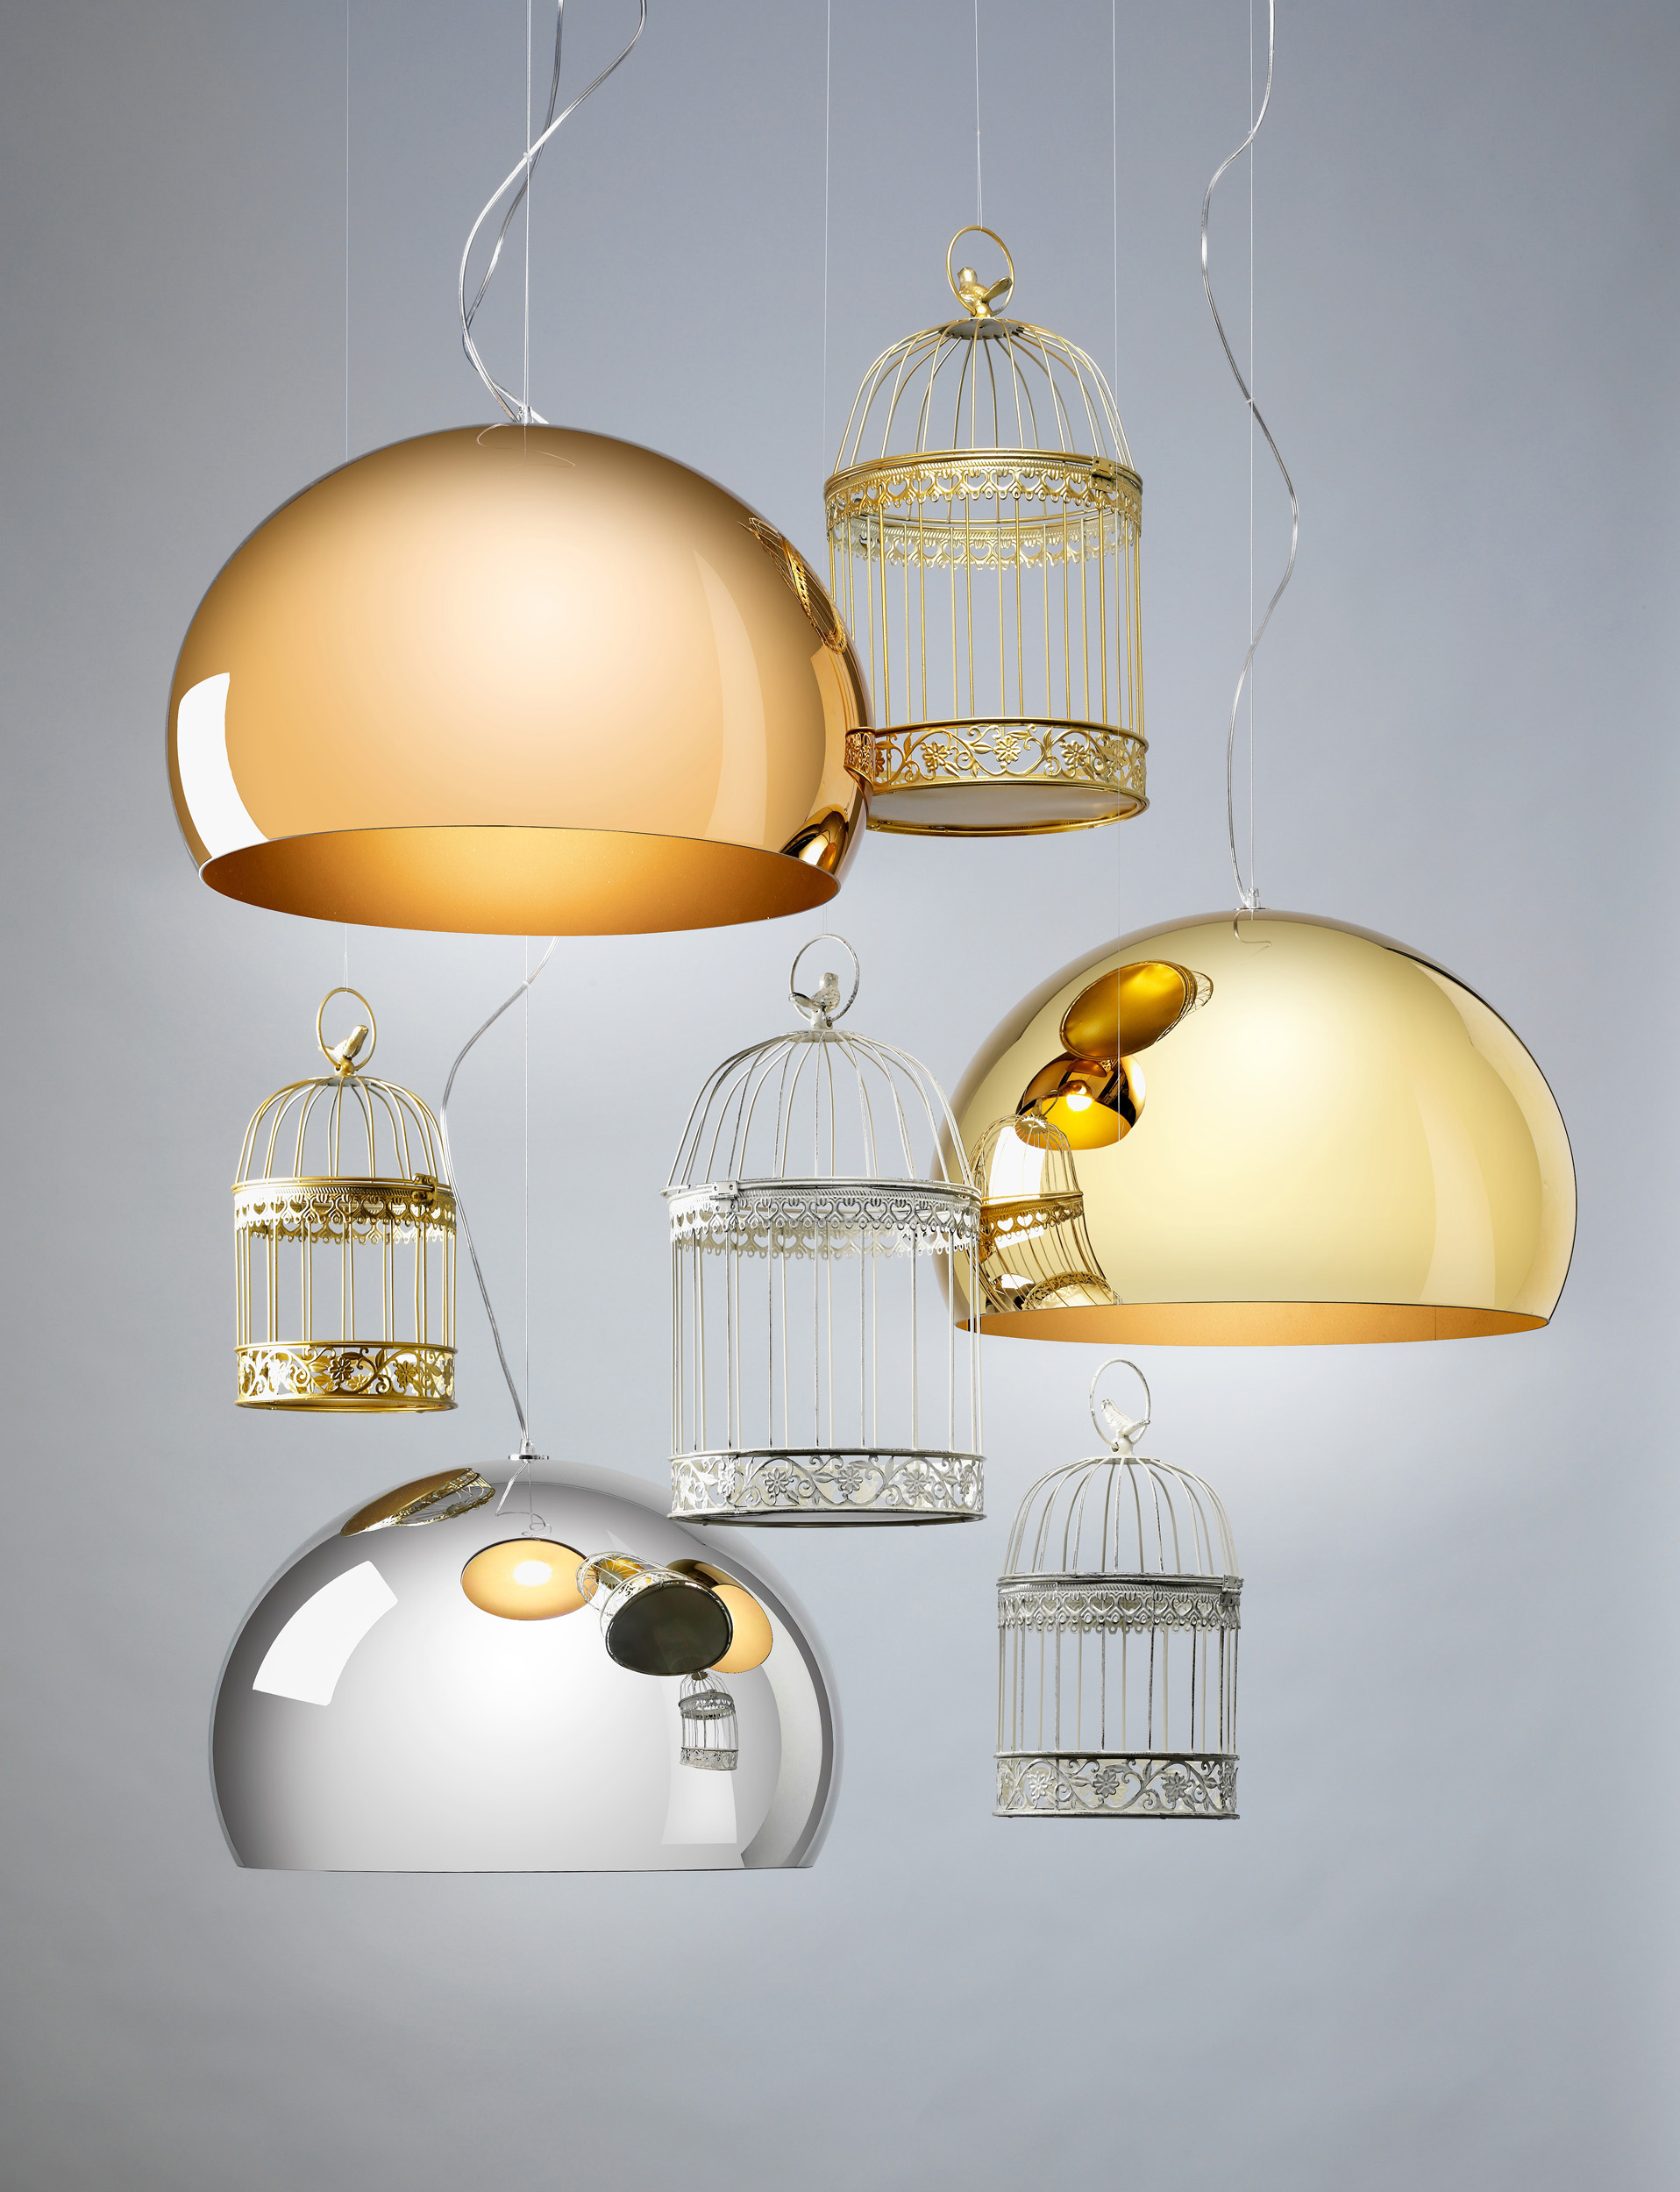 'Fly' pendants by Ferruccio Laviani for Kartell at Backhouse, one of the Style Safari destinations. 